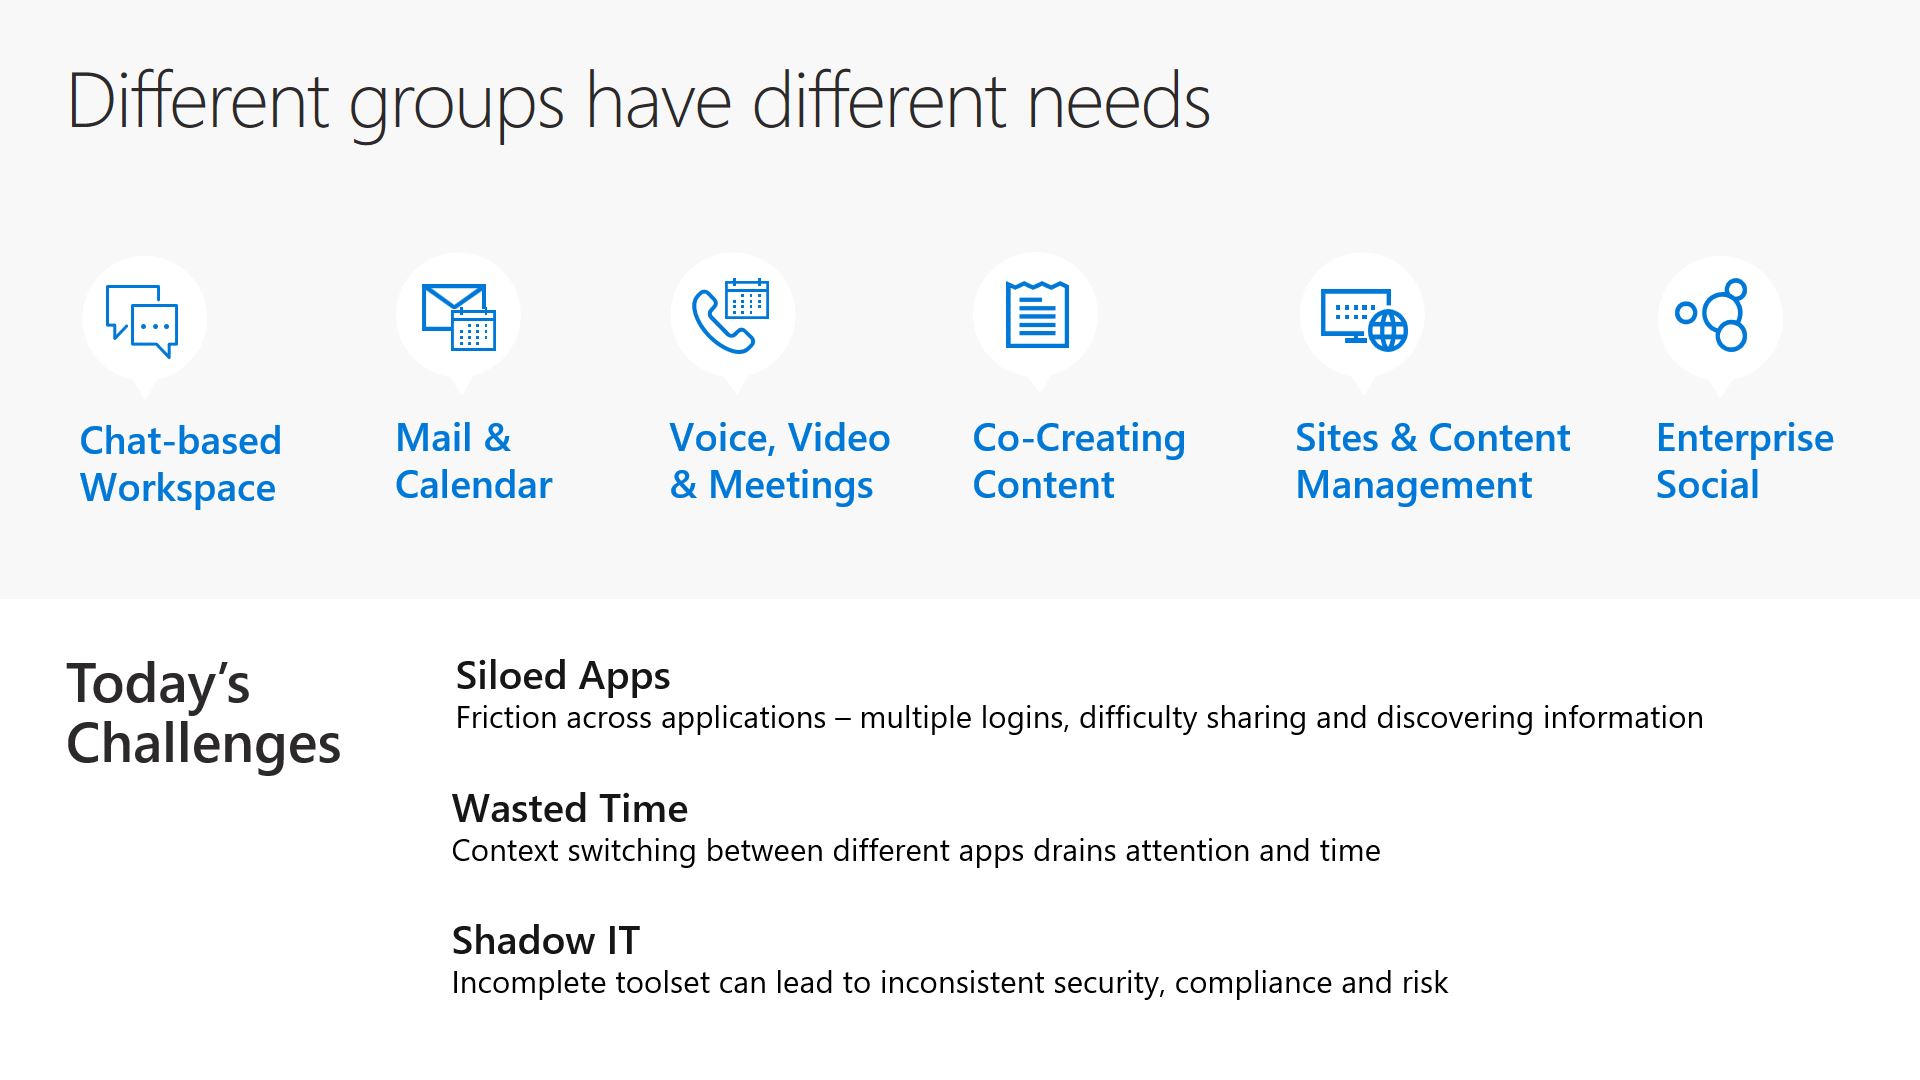 What are Office 365 Groups, different groups have different needs